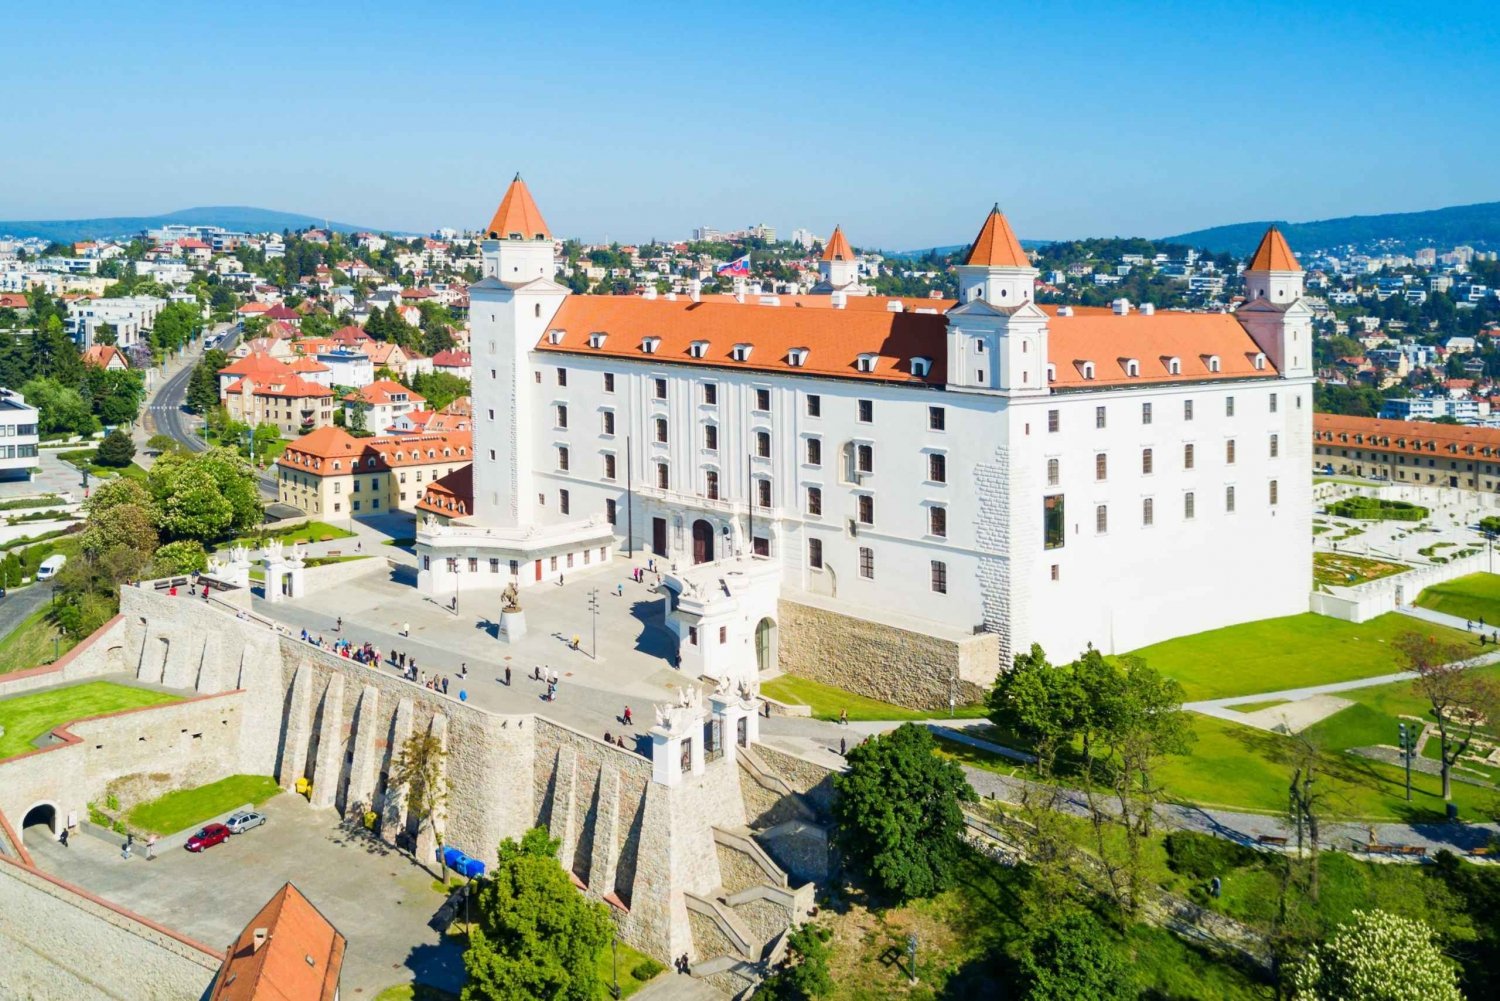 Private day trip from Vienna to Bratislava, and back